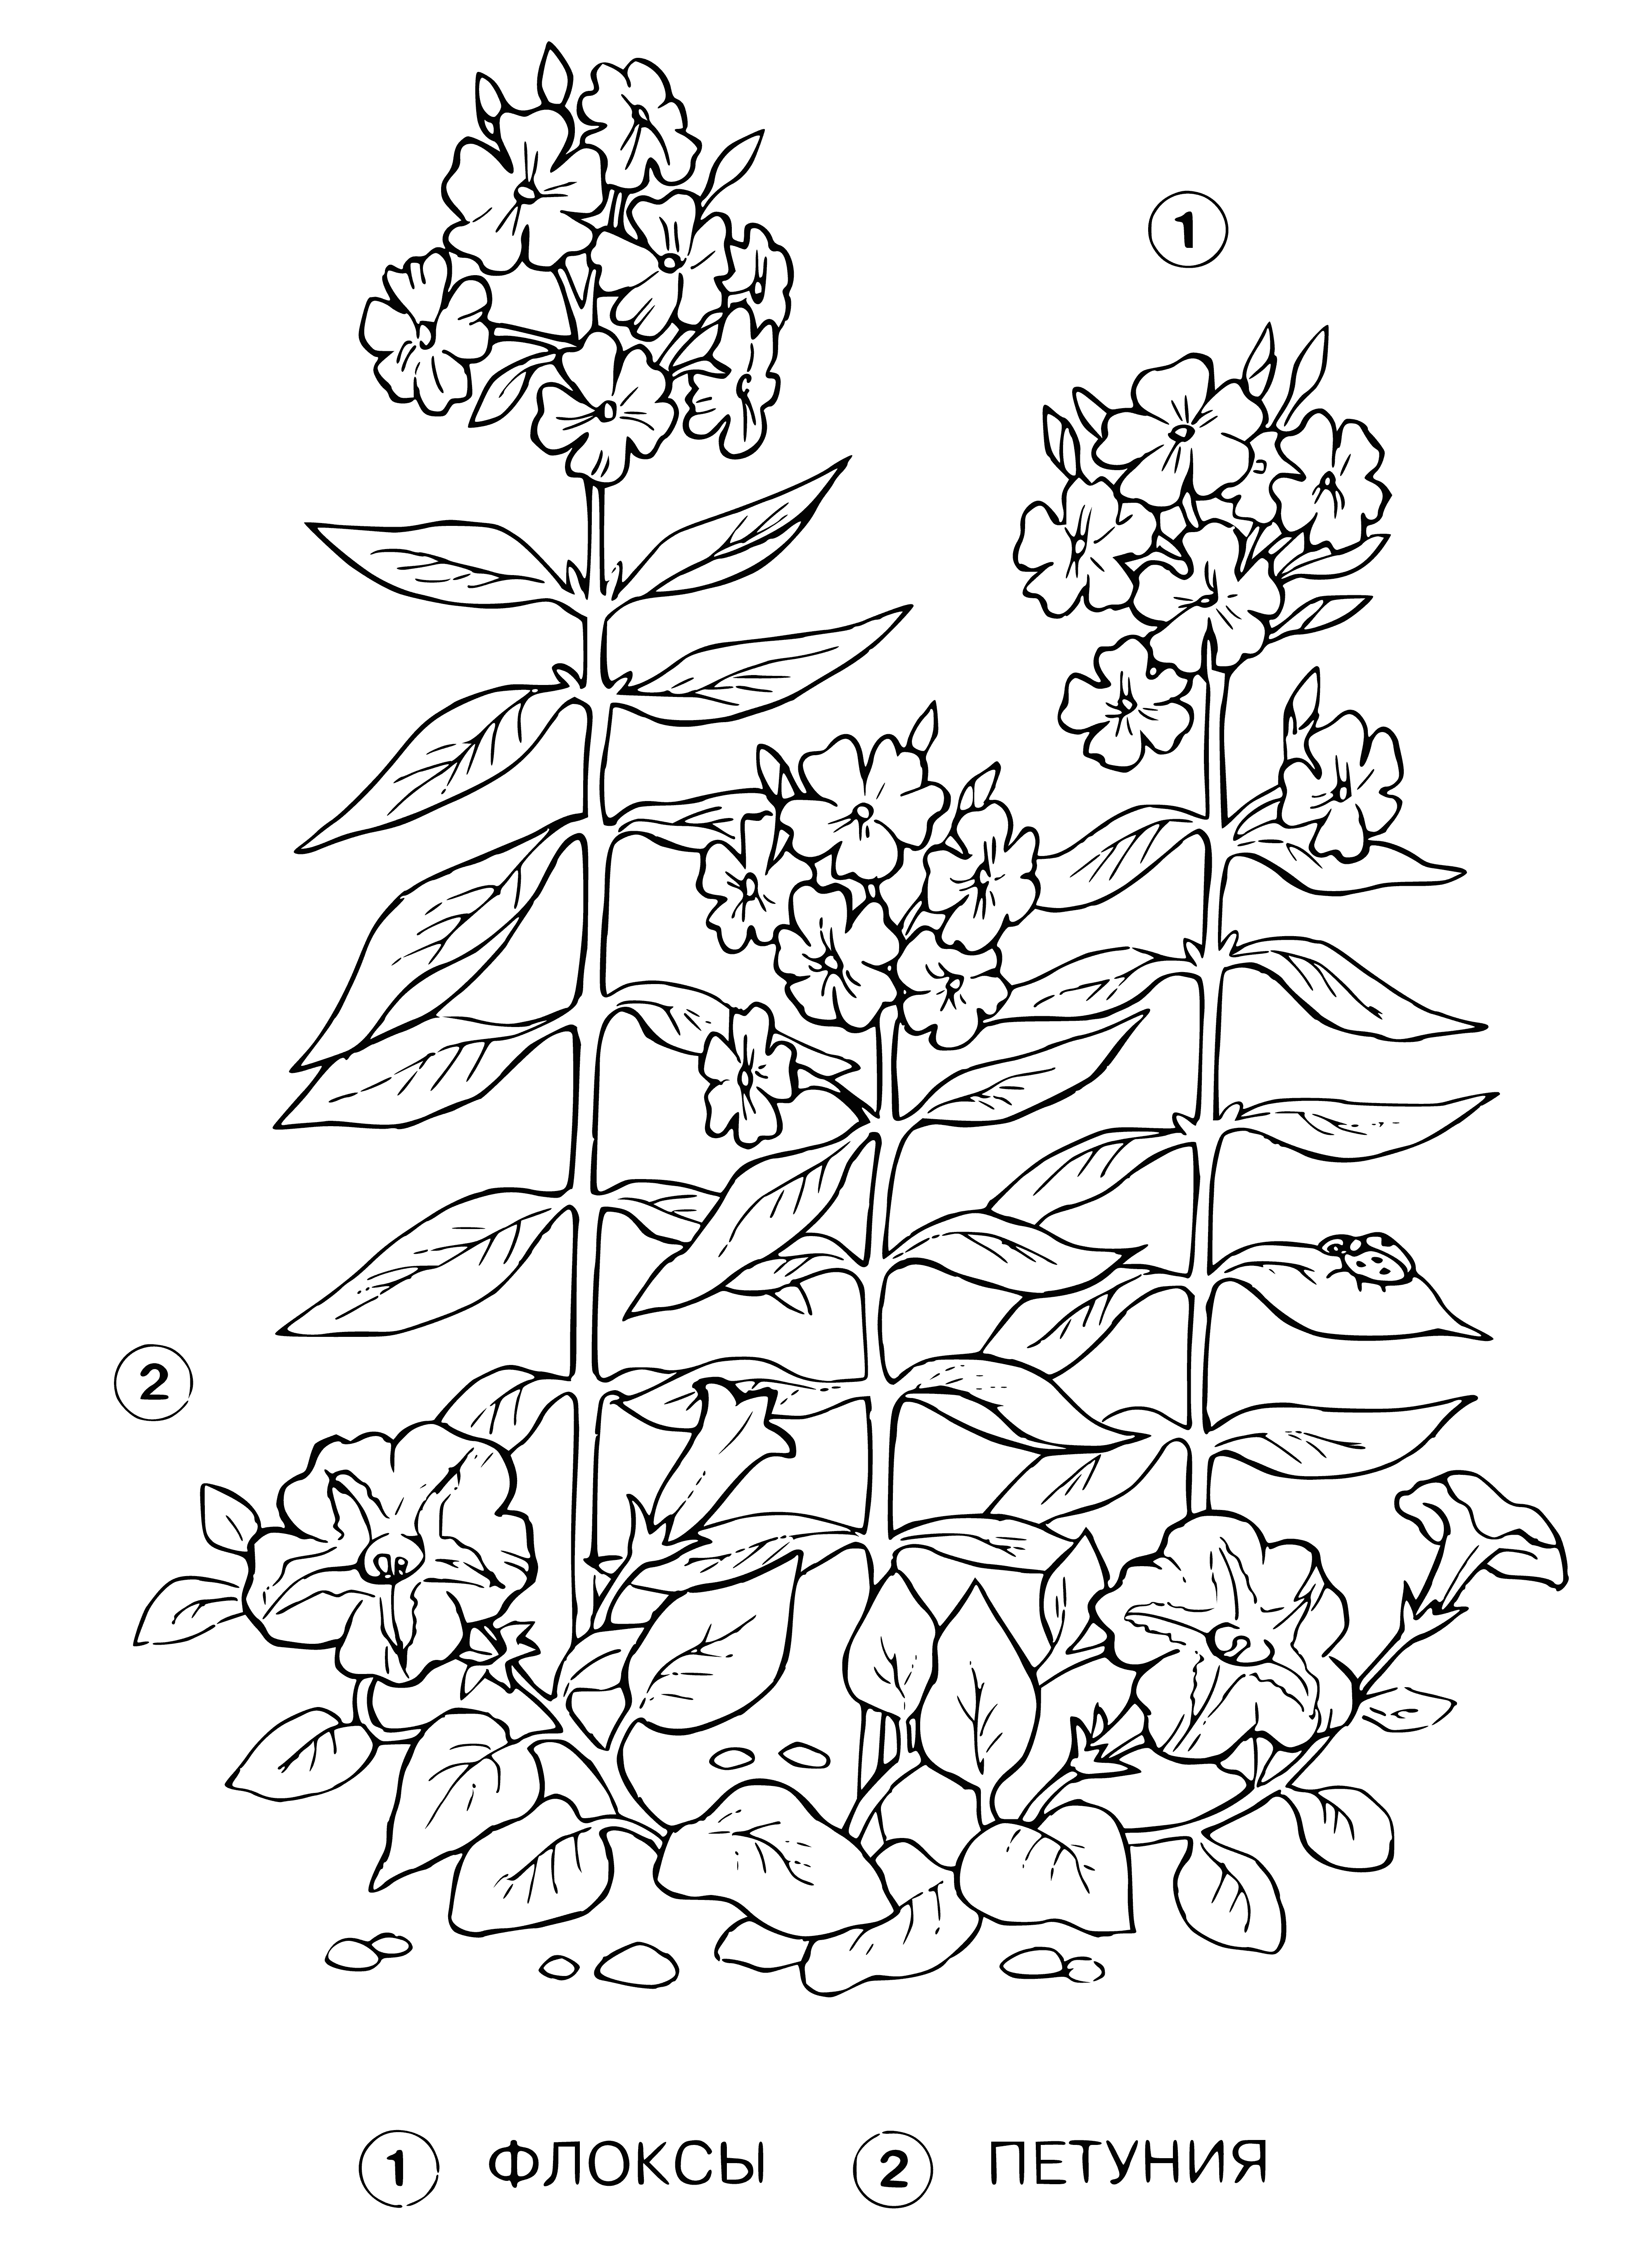 coloring page: Coloring page has yellow phlox surrounded by petunias in colors of pink, purple & white w/ yellow petals + green center.